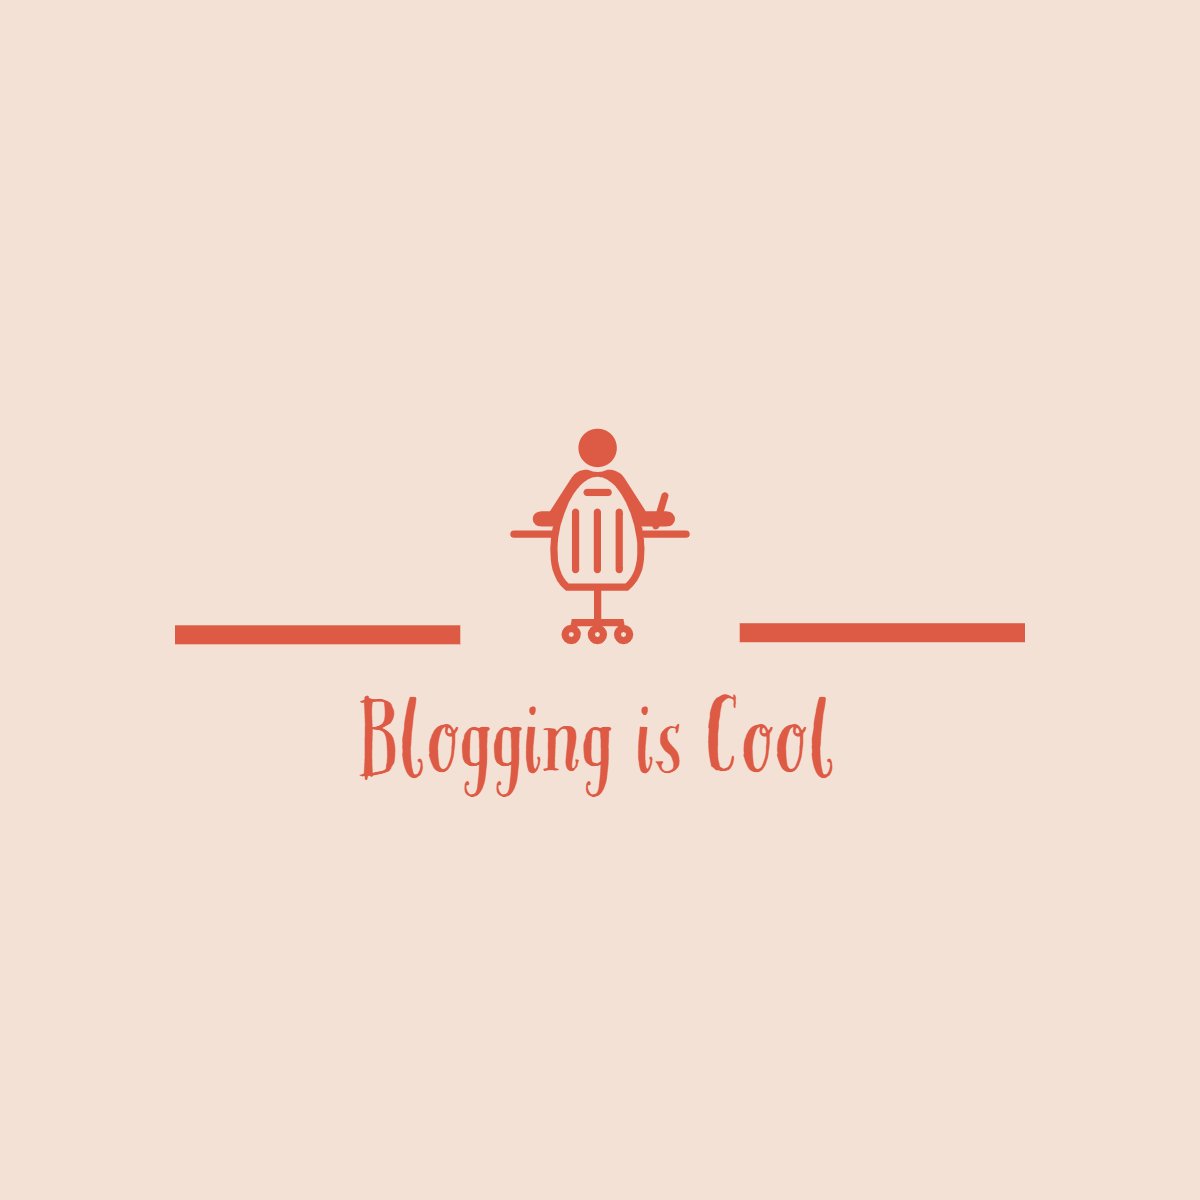 Bloggingiscool.com Create a Blog in 20 Minutes - Step-by-Step Guide